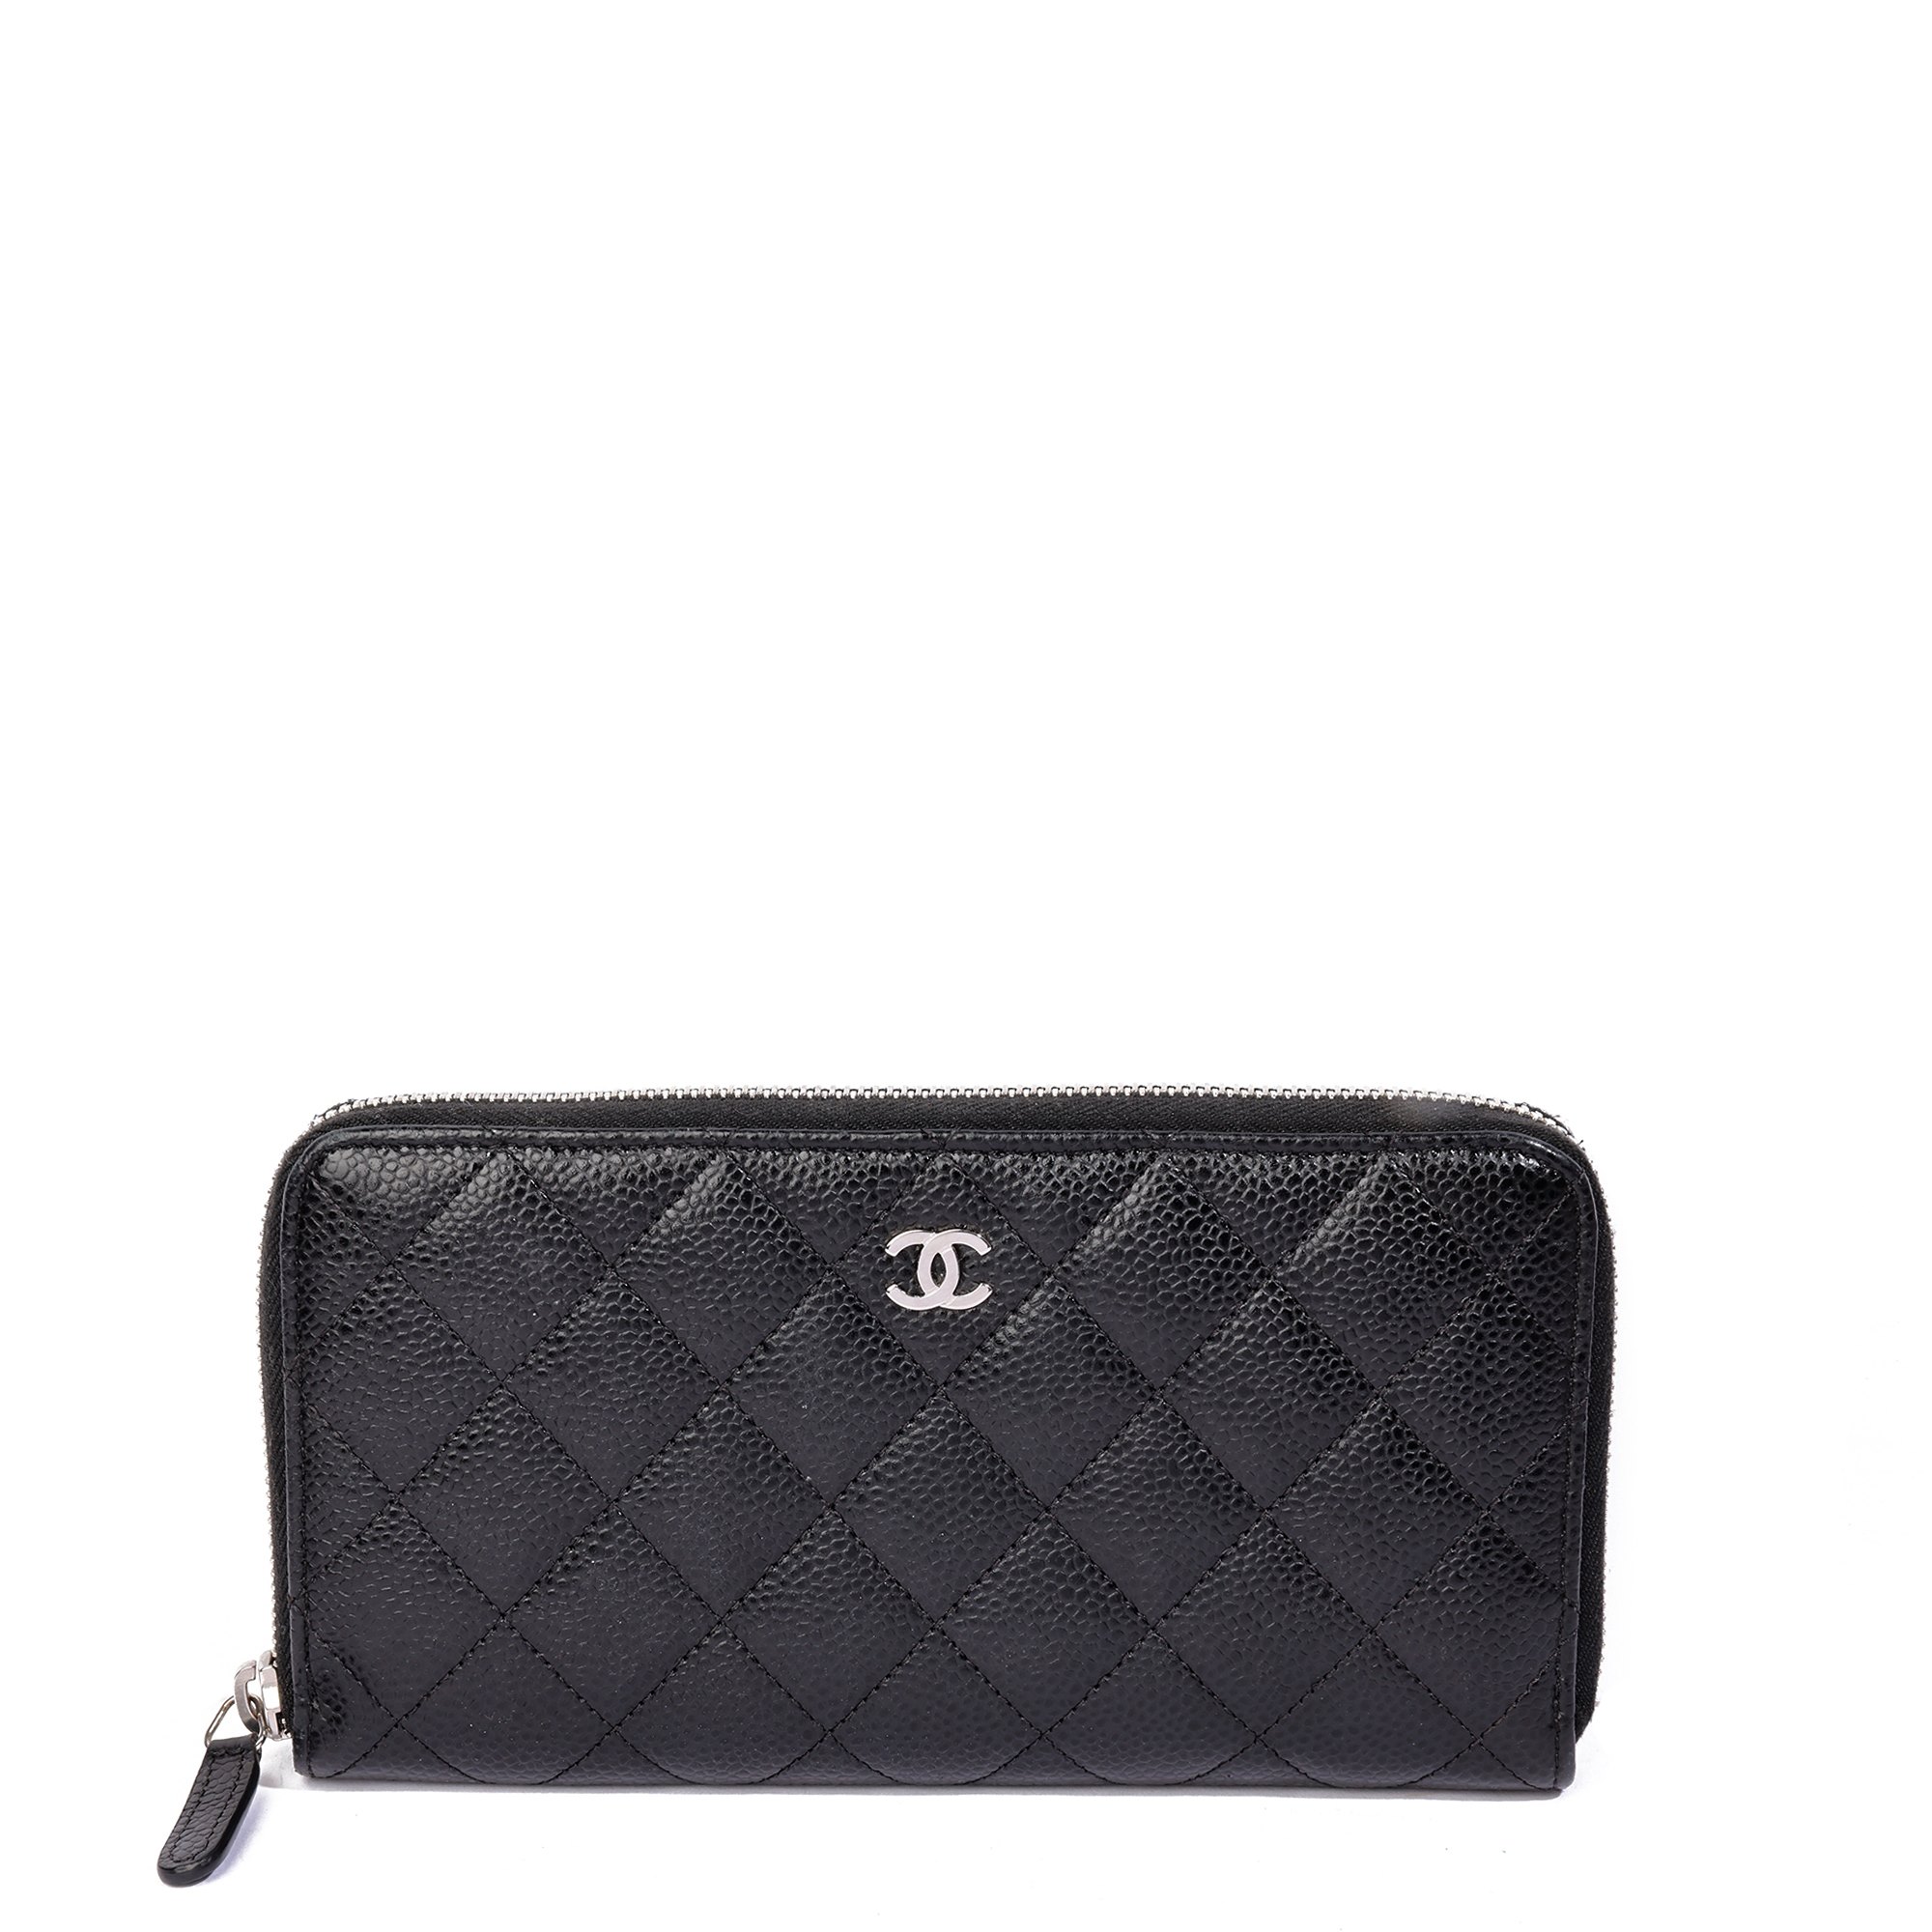 Chanel Black Quilted Caviar Leather Classic Long Zipped Wallet